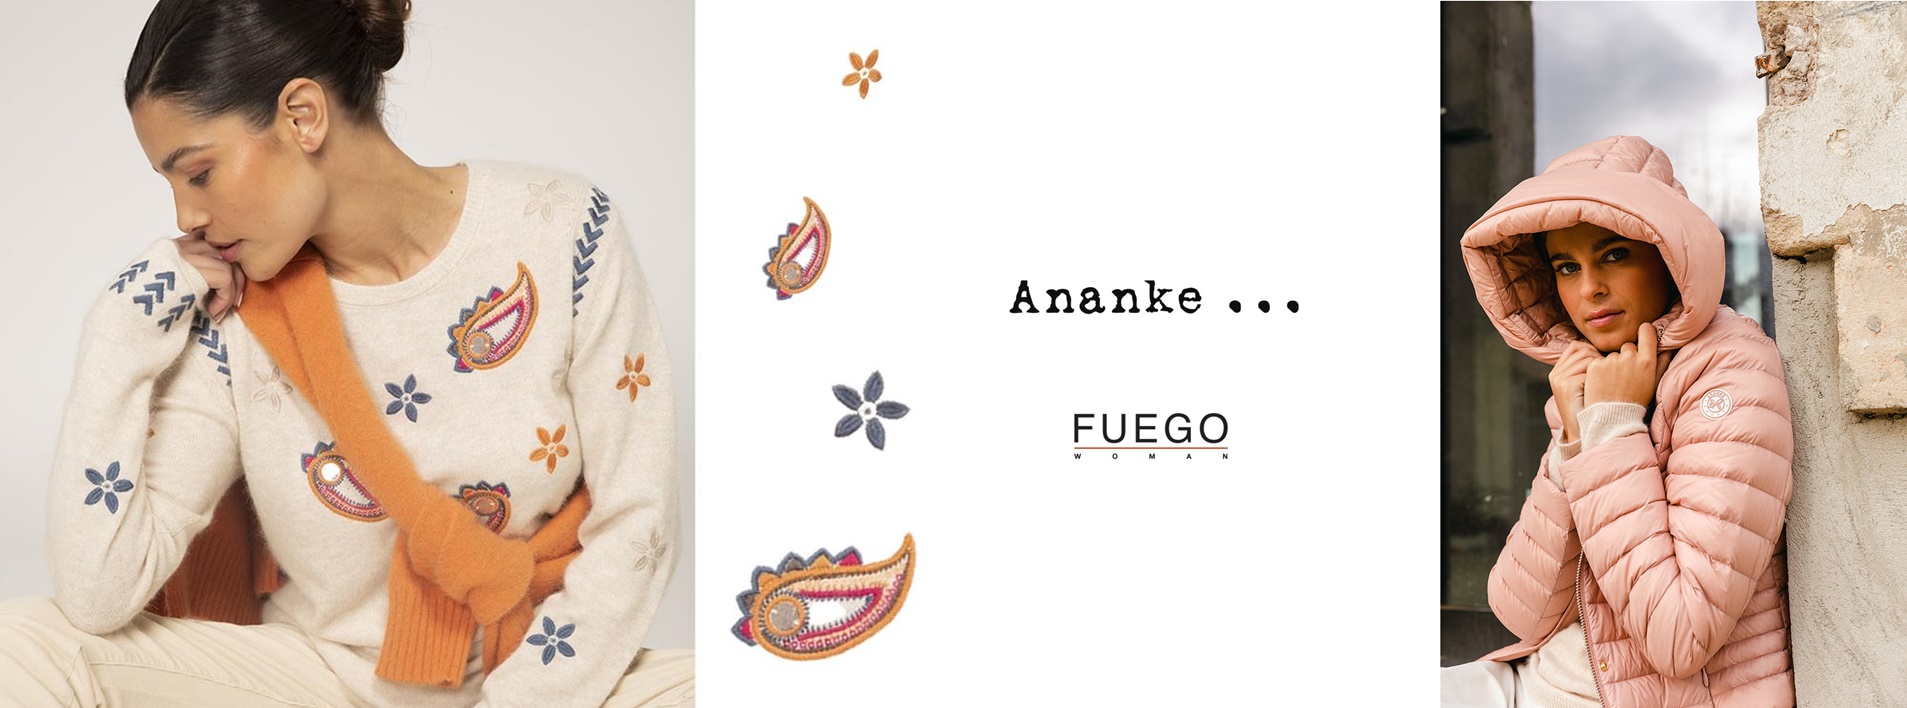 fuego-ananke-banner-invierno-pc